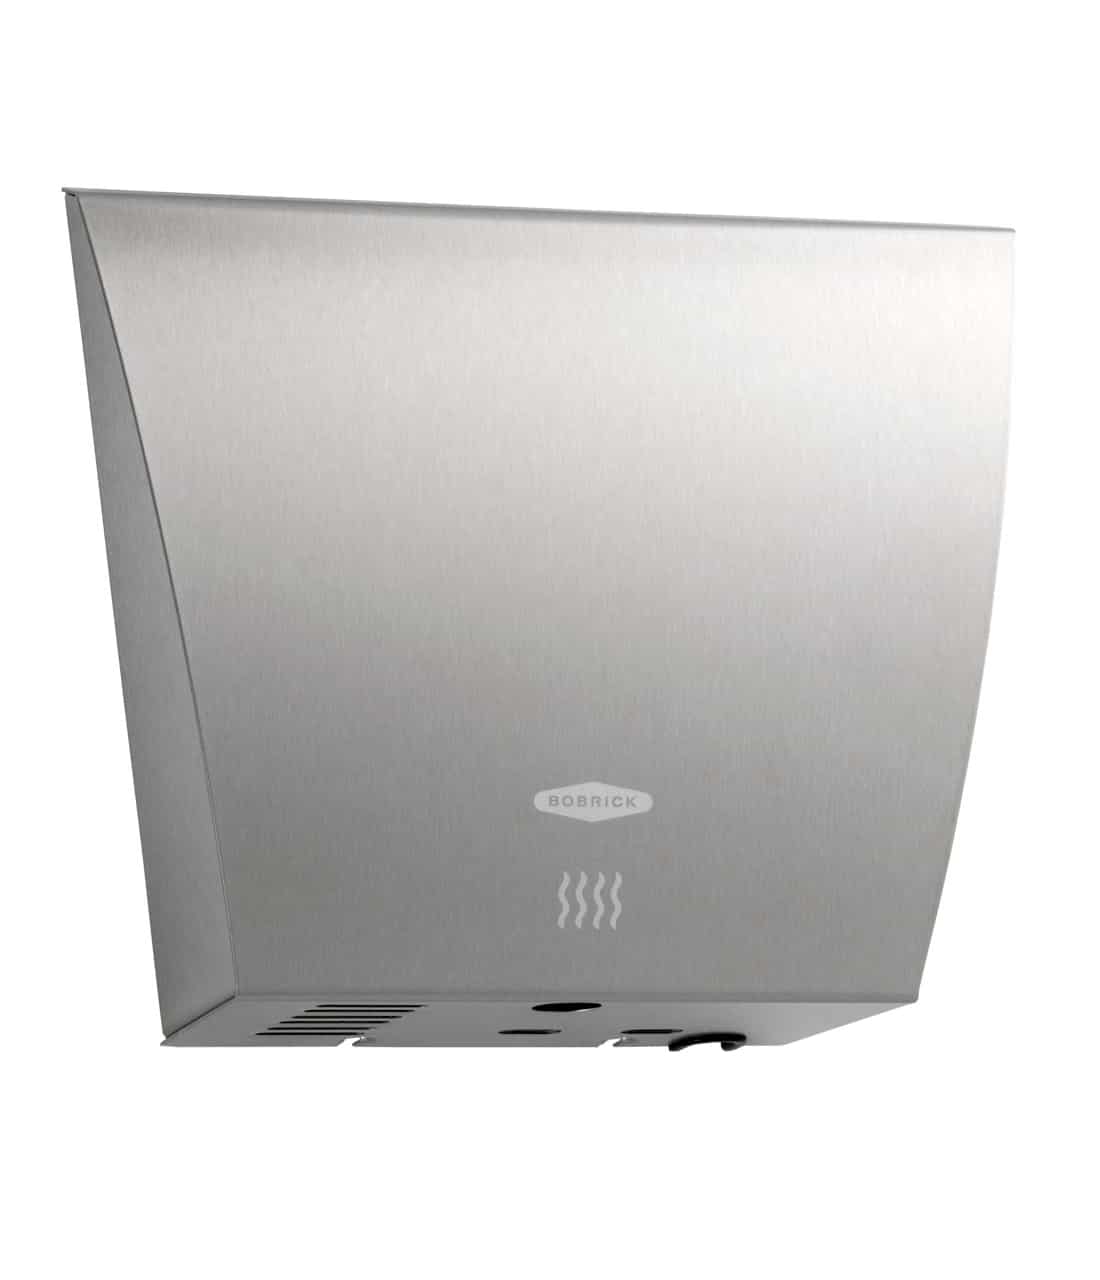 Molded Gray Finish Bobrick 710 CompacDryer ABS Plastic Surface-Mounted Automatic Hand Dryer 115V 